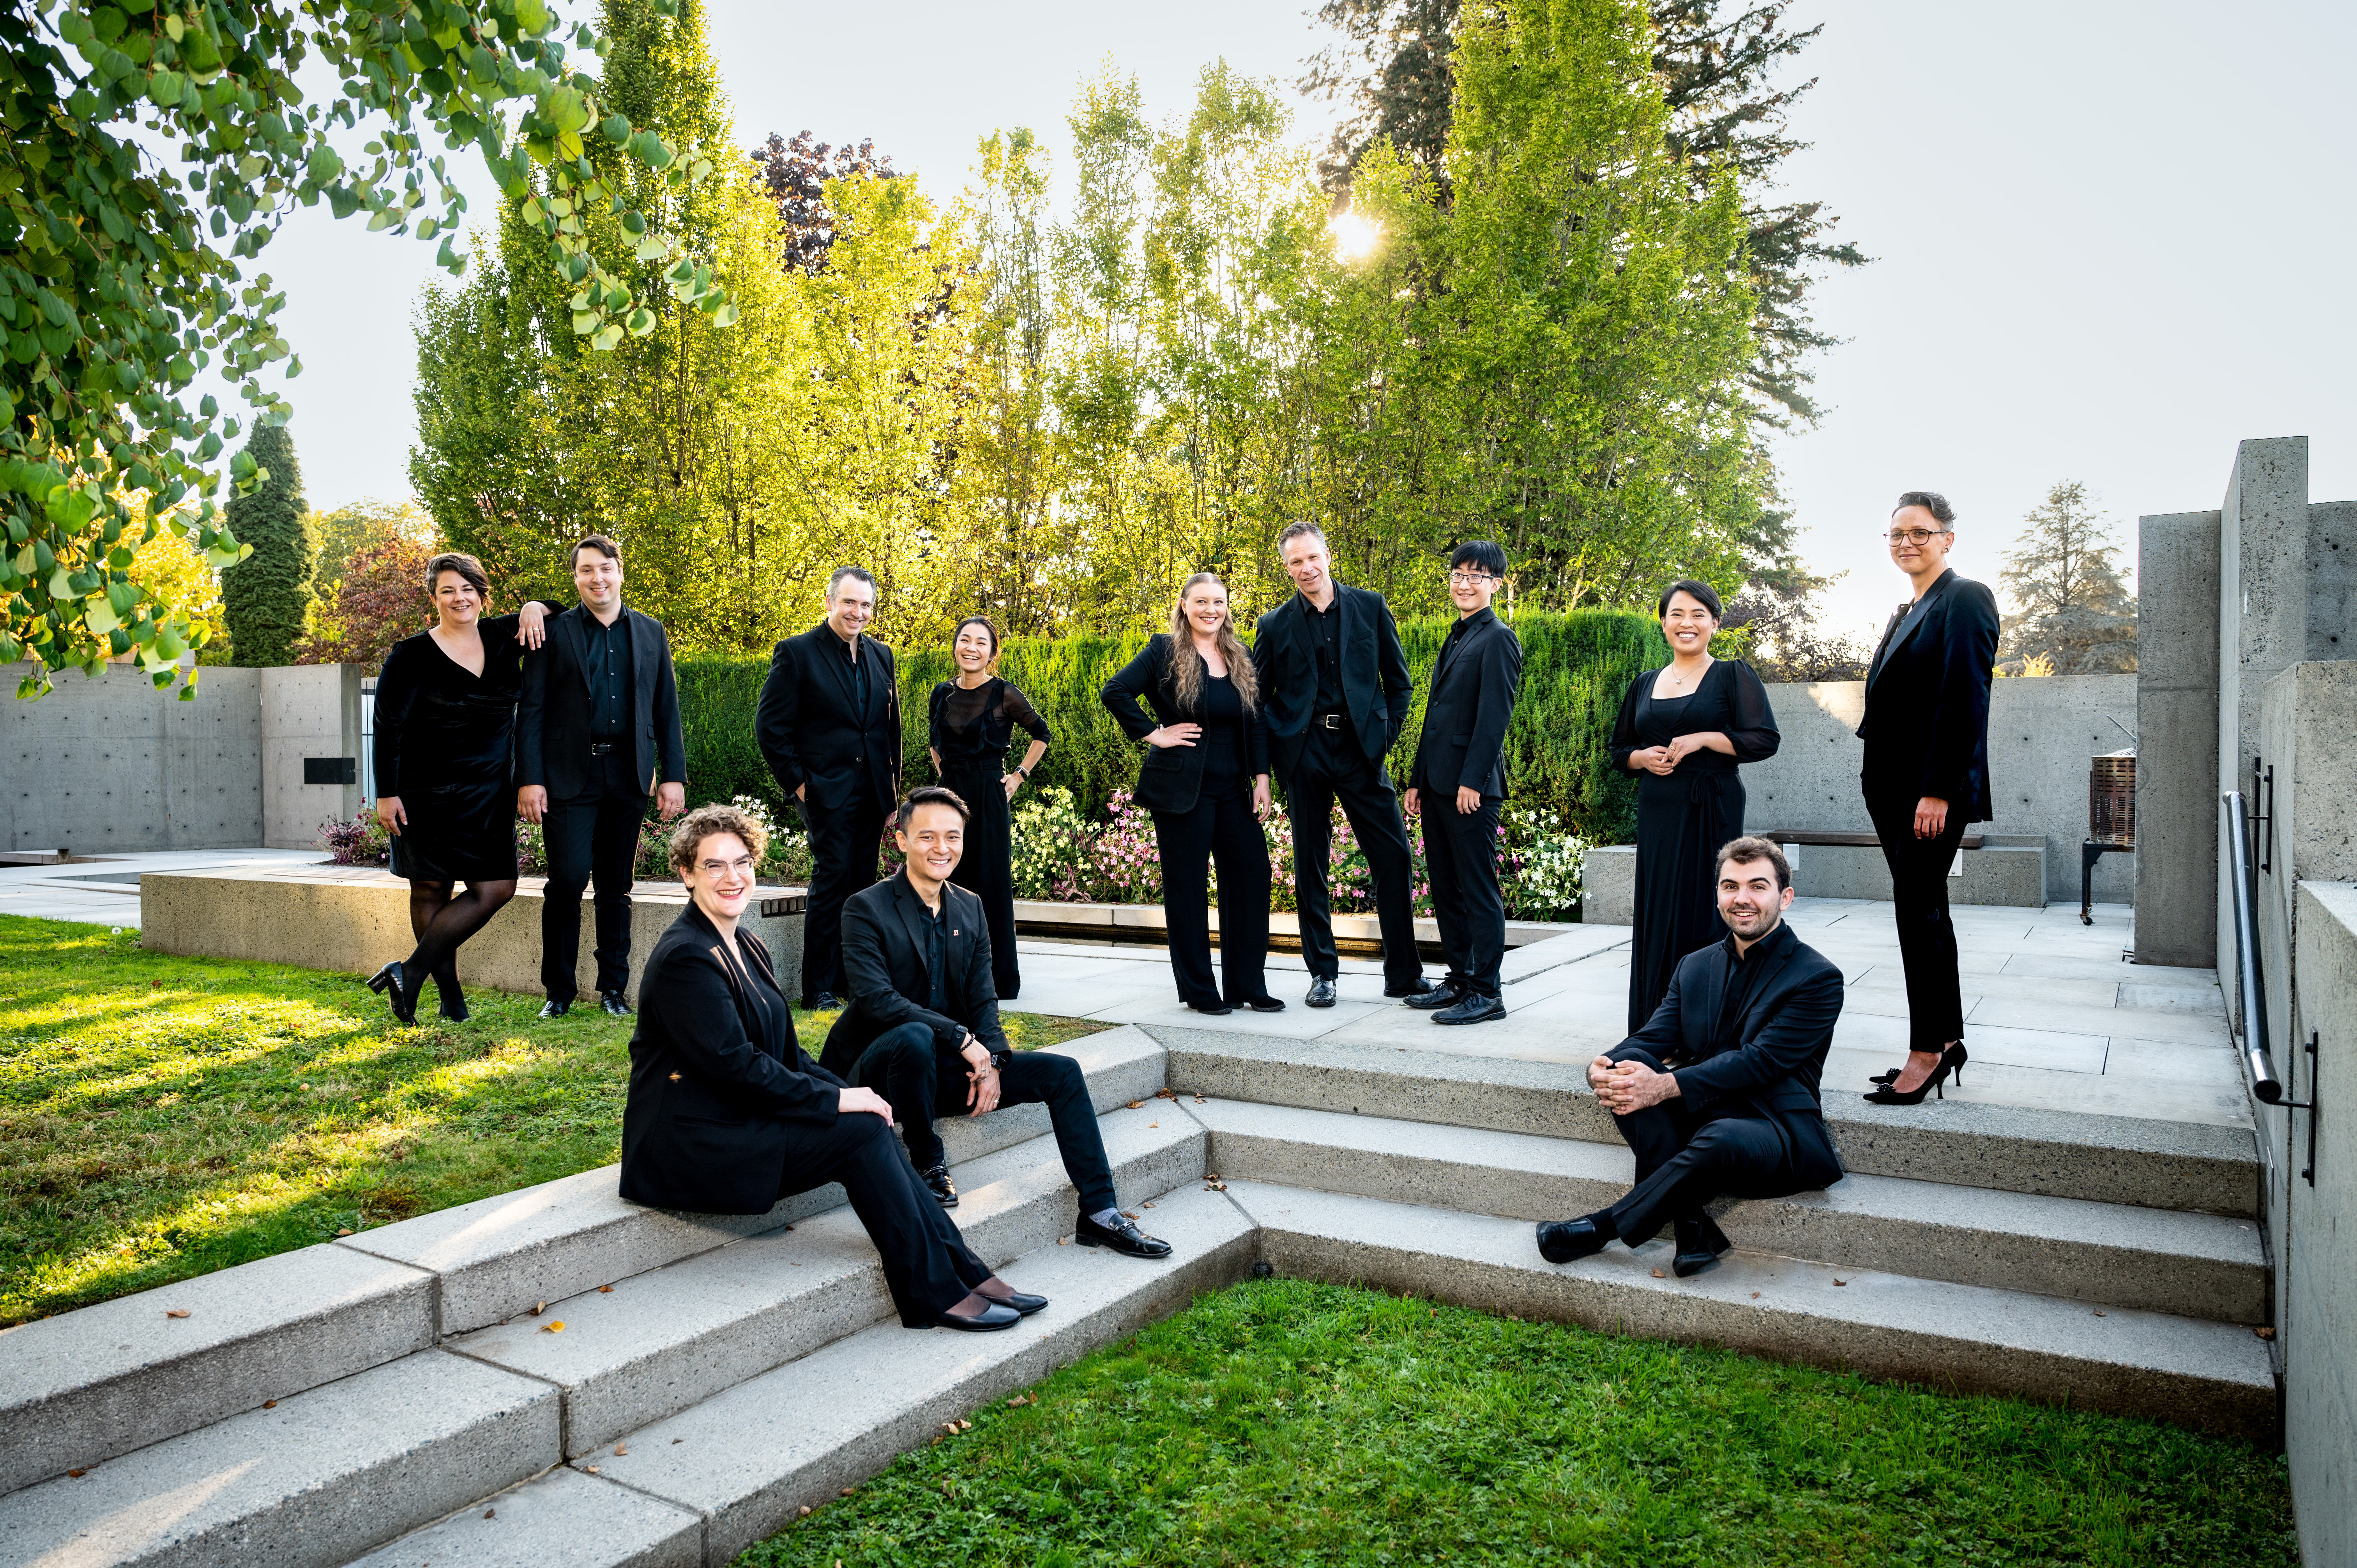 musica intima is a 12-person choral group. 